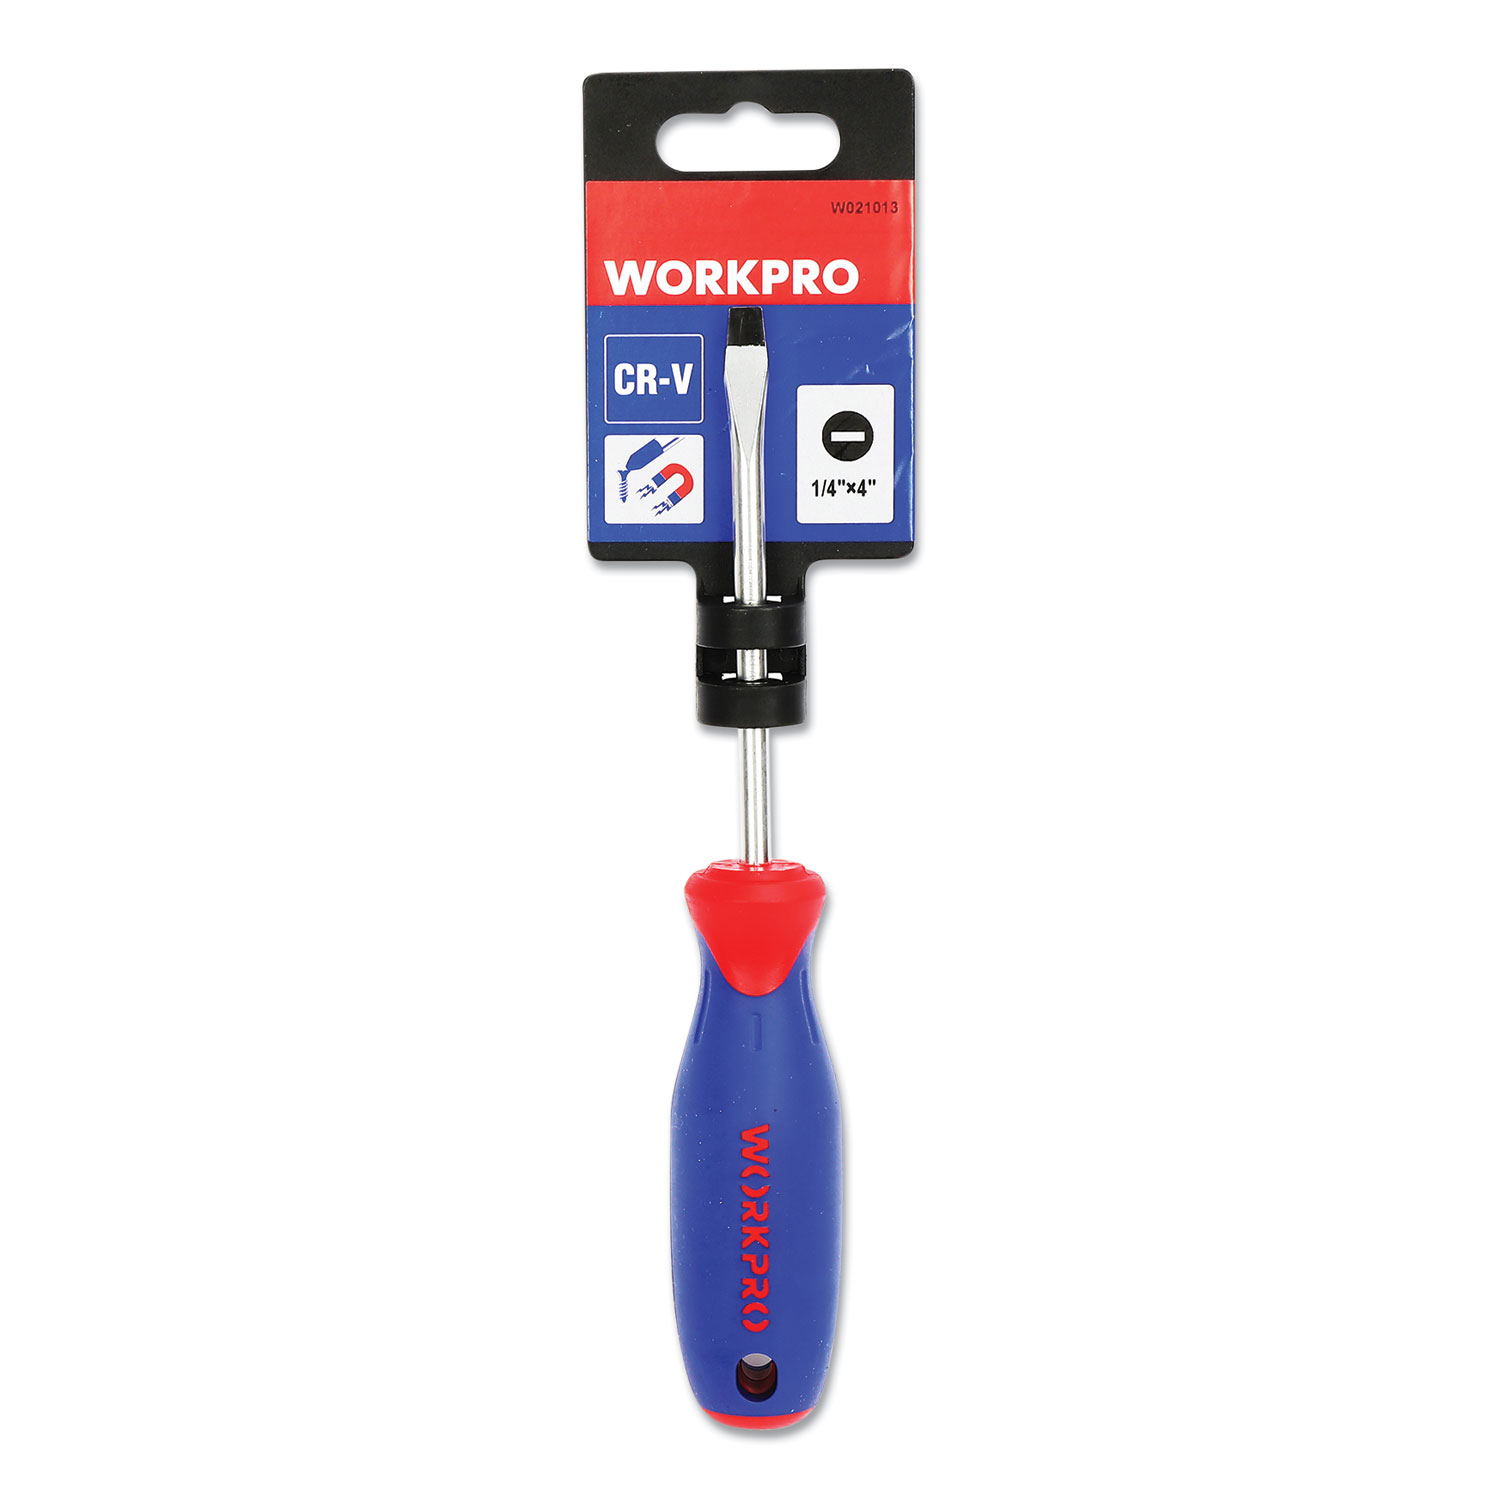 Workpro® Straight-Handle Cushion-Grip Screwdriver, 1/4 Slotted Tip, 4 Shaft